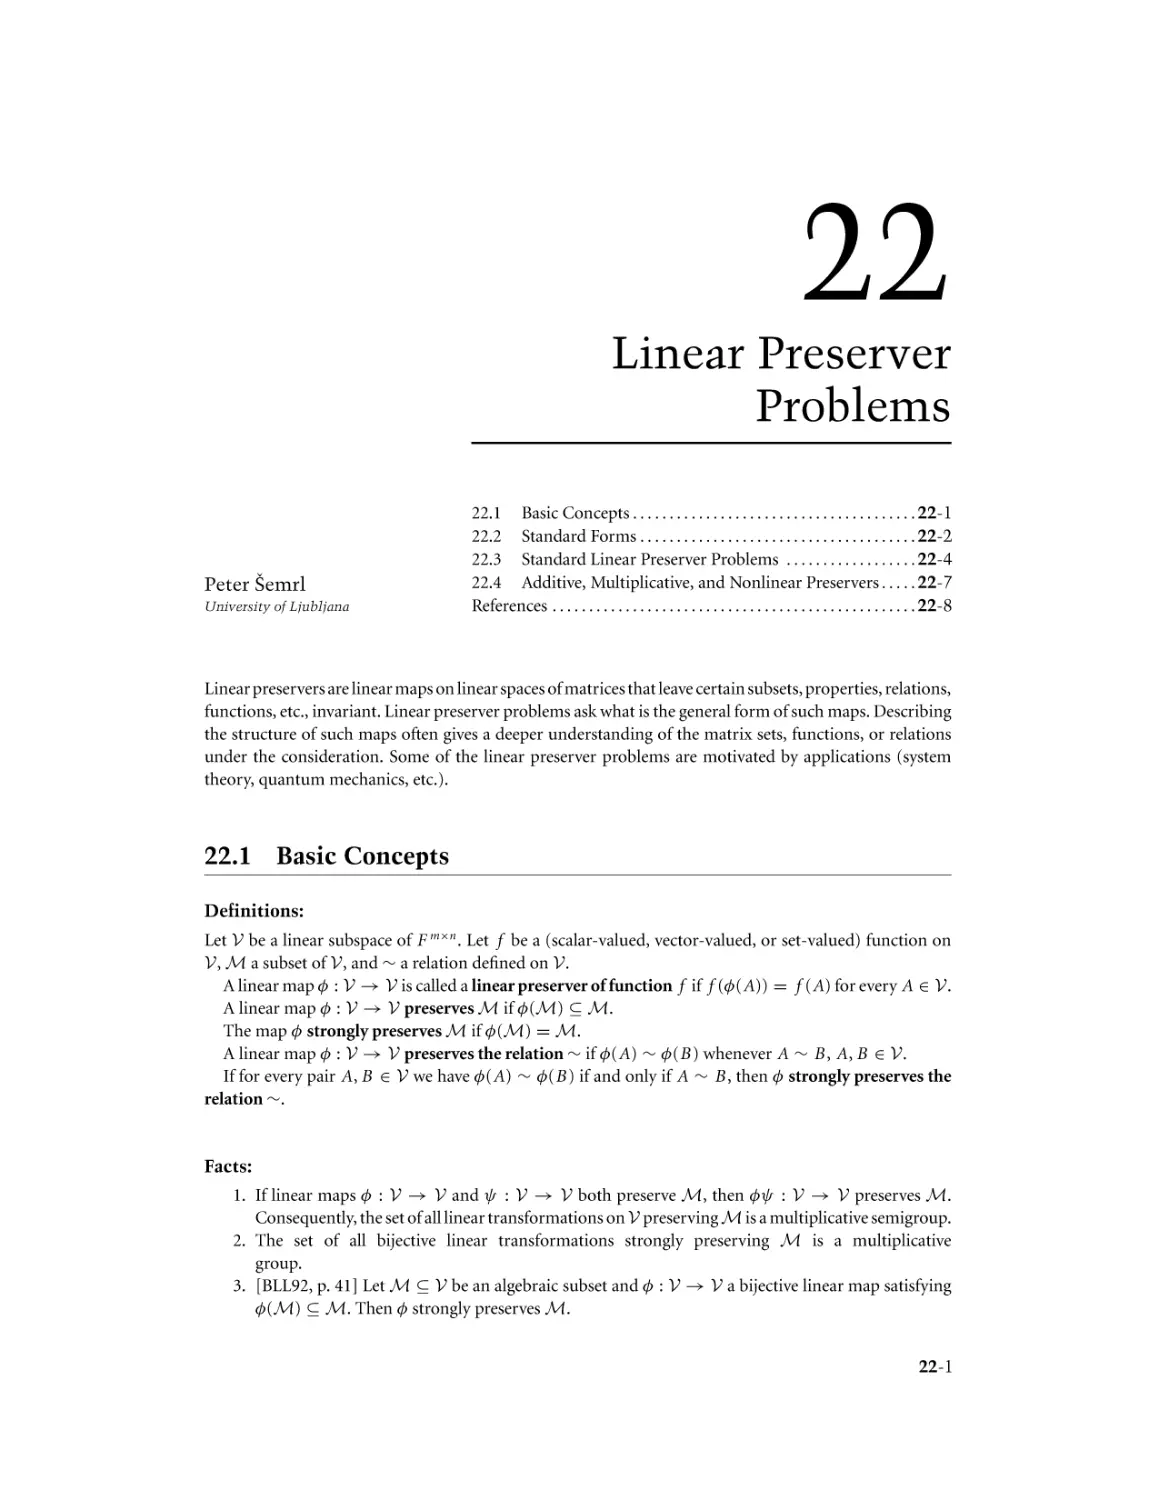 Chapter 22. Linear Preserver Problems